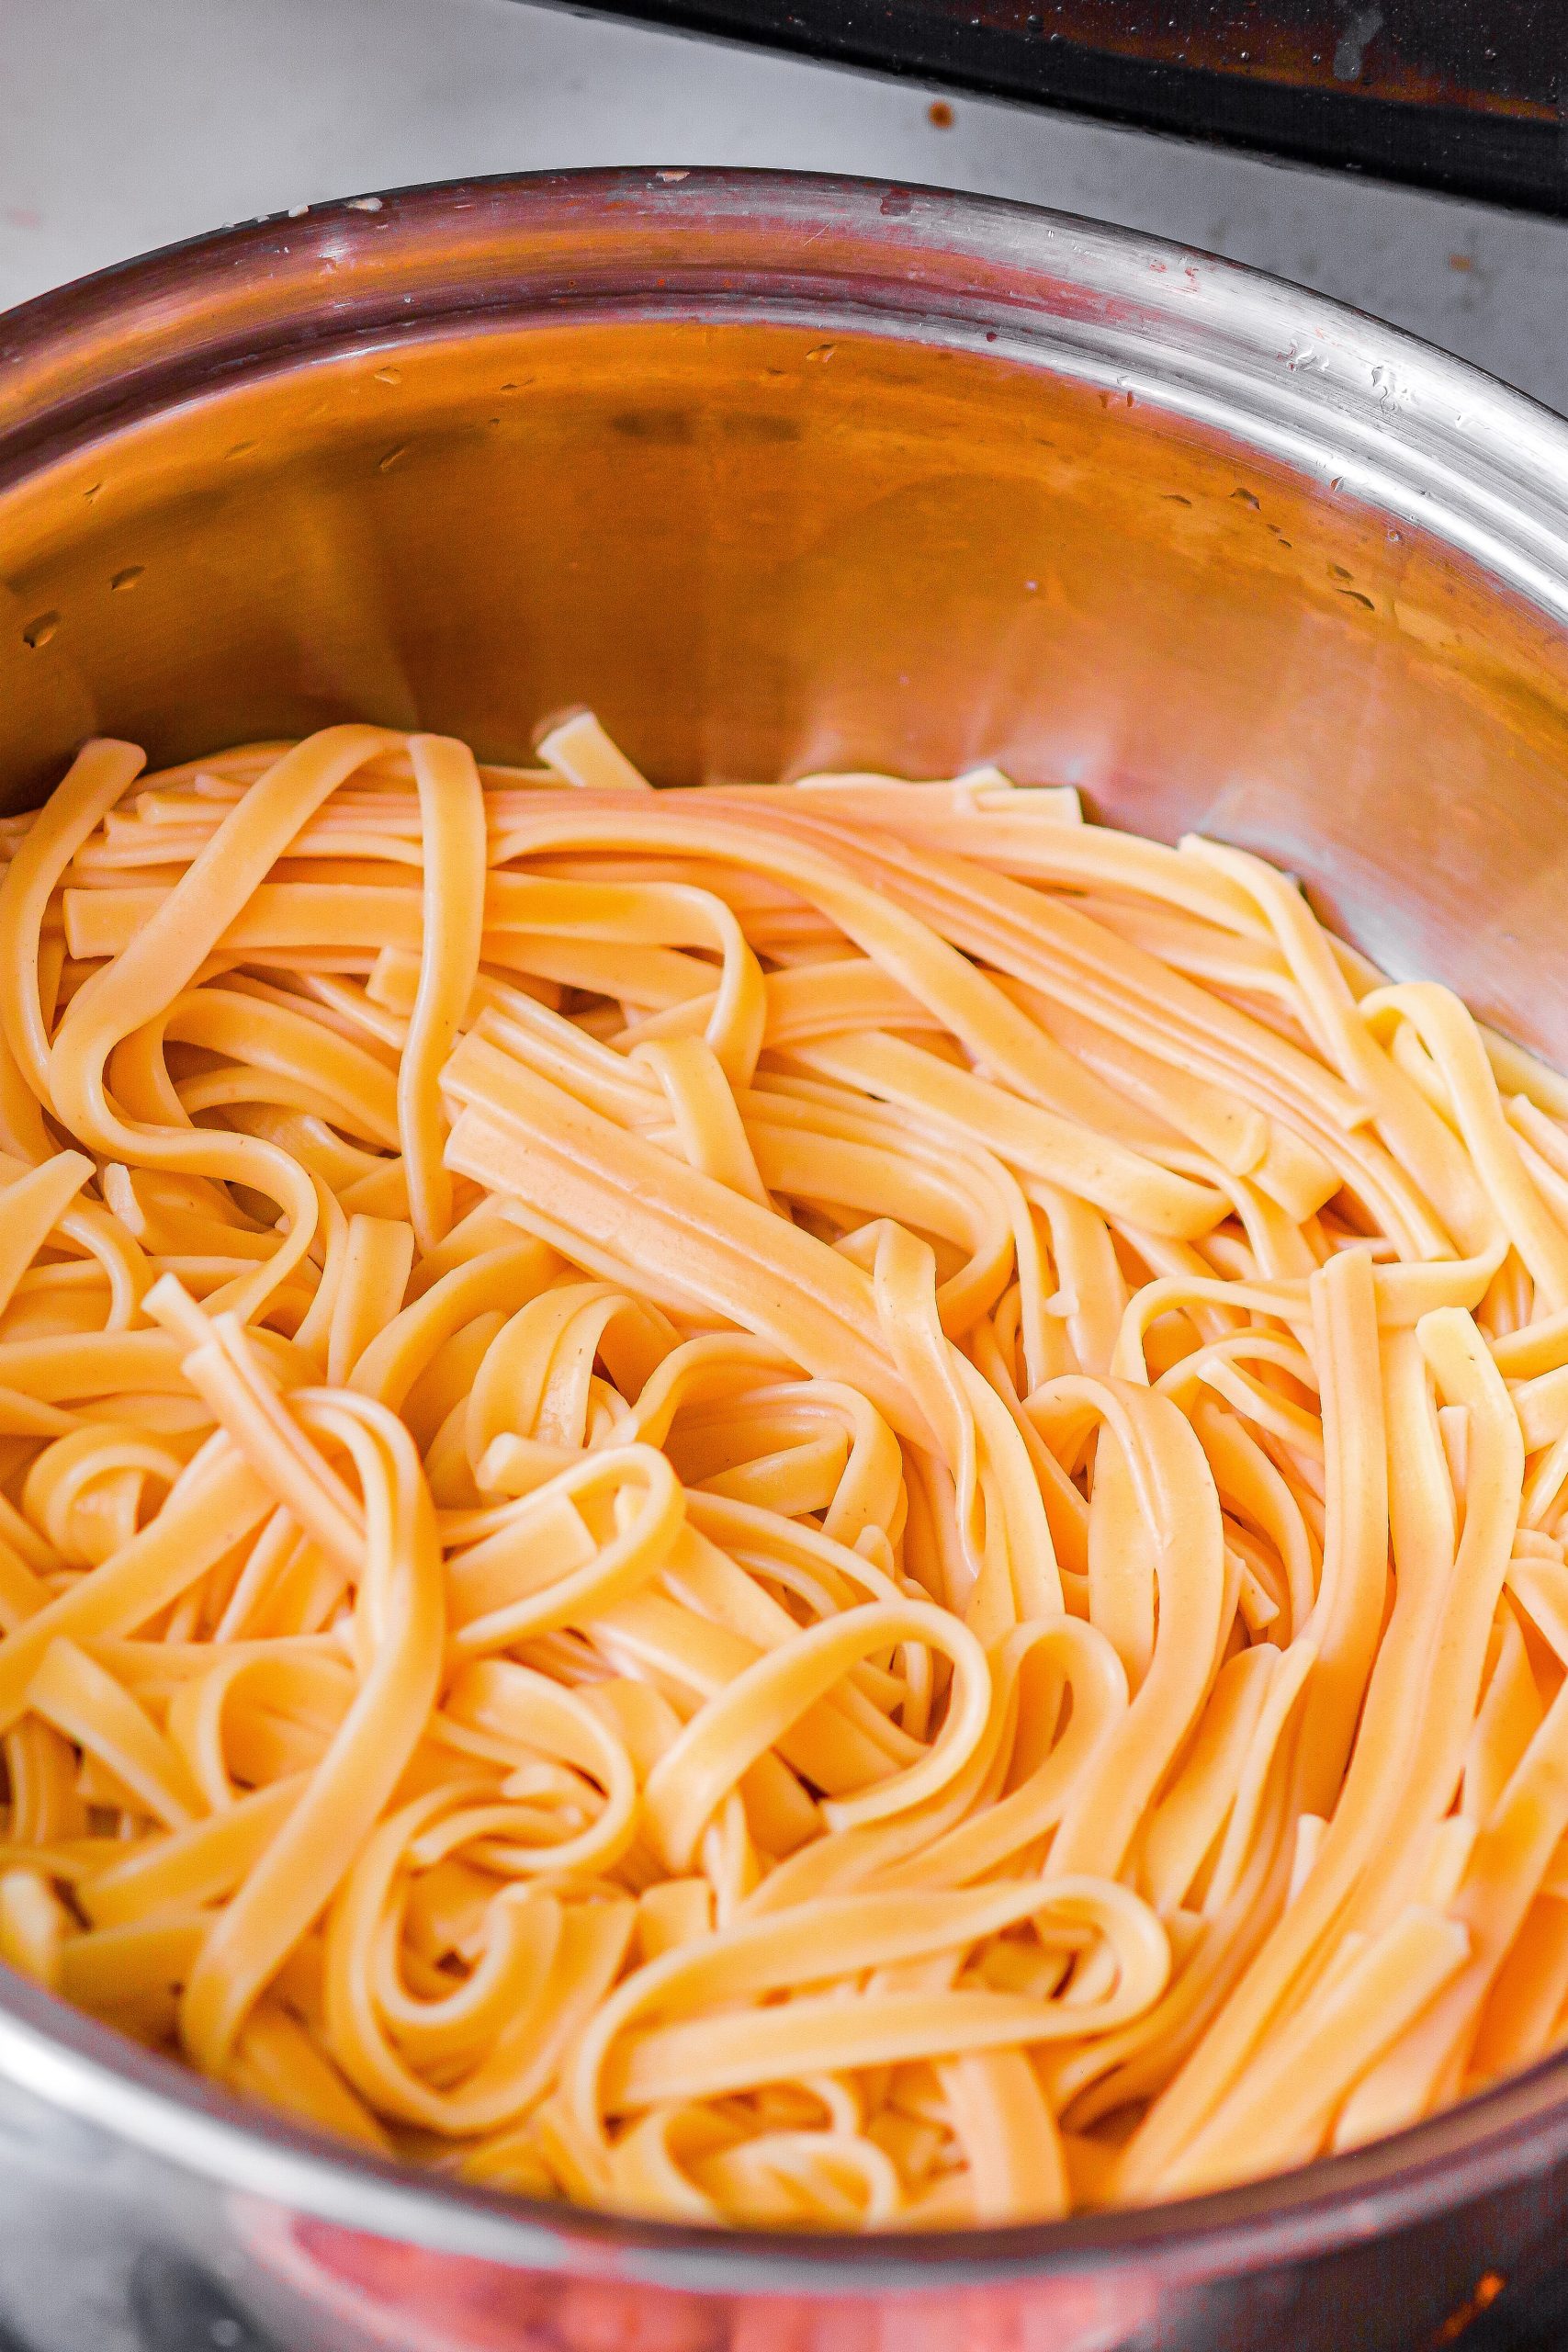 Cook the linguini in a pot of boiling water to your liking, and drain well.